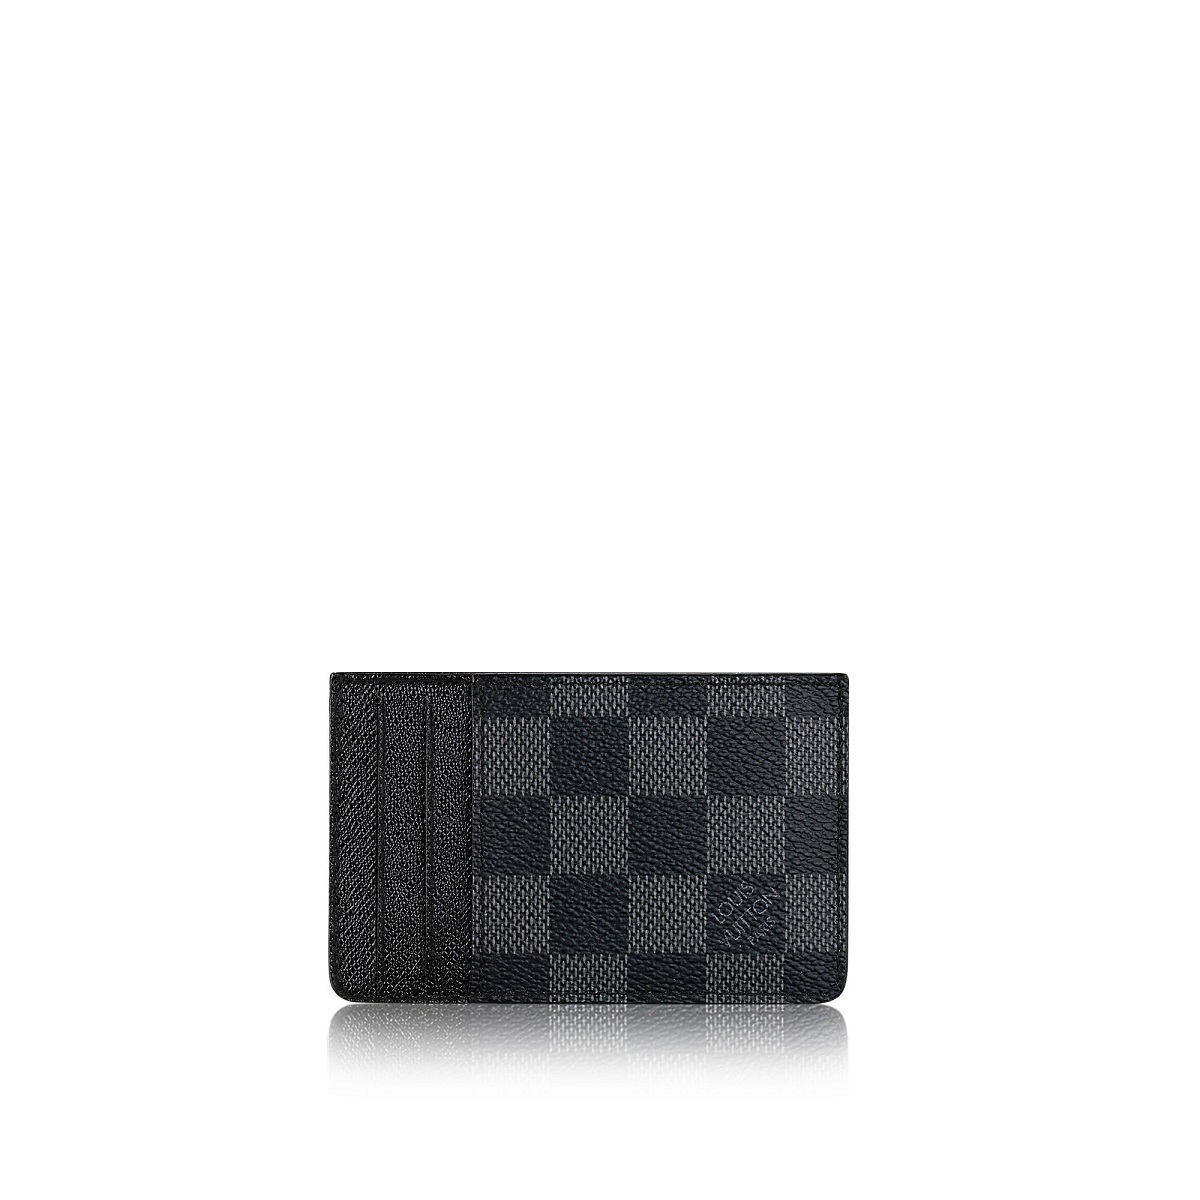 the end Guarantee passionate blakemag-magazine-mode-homme-maroquinerie-louis-vuitton-neo-porte-cartes-damier-graphite  - Blakemag